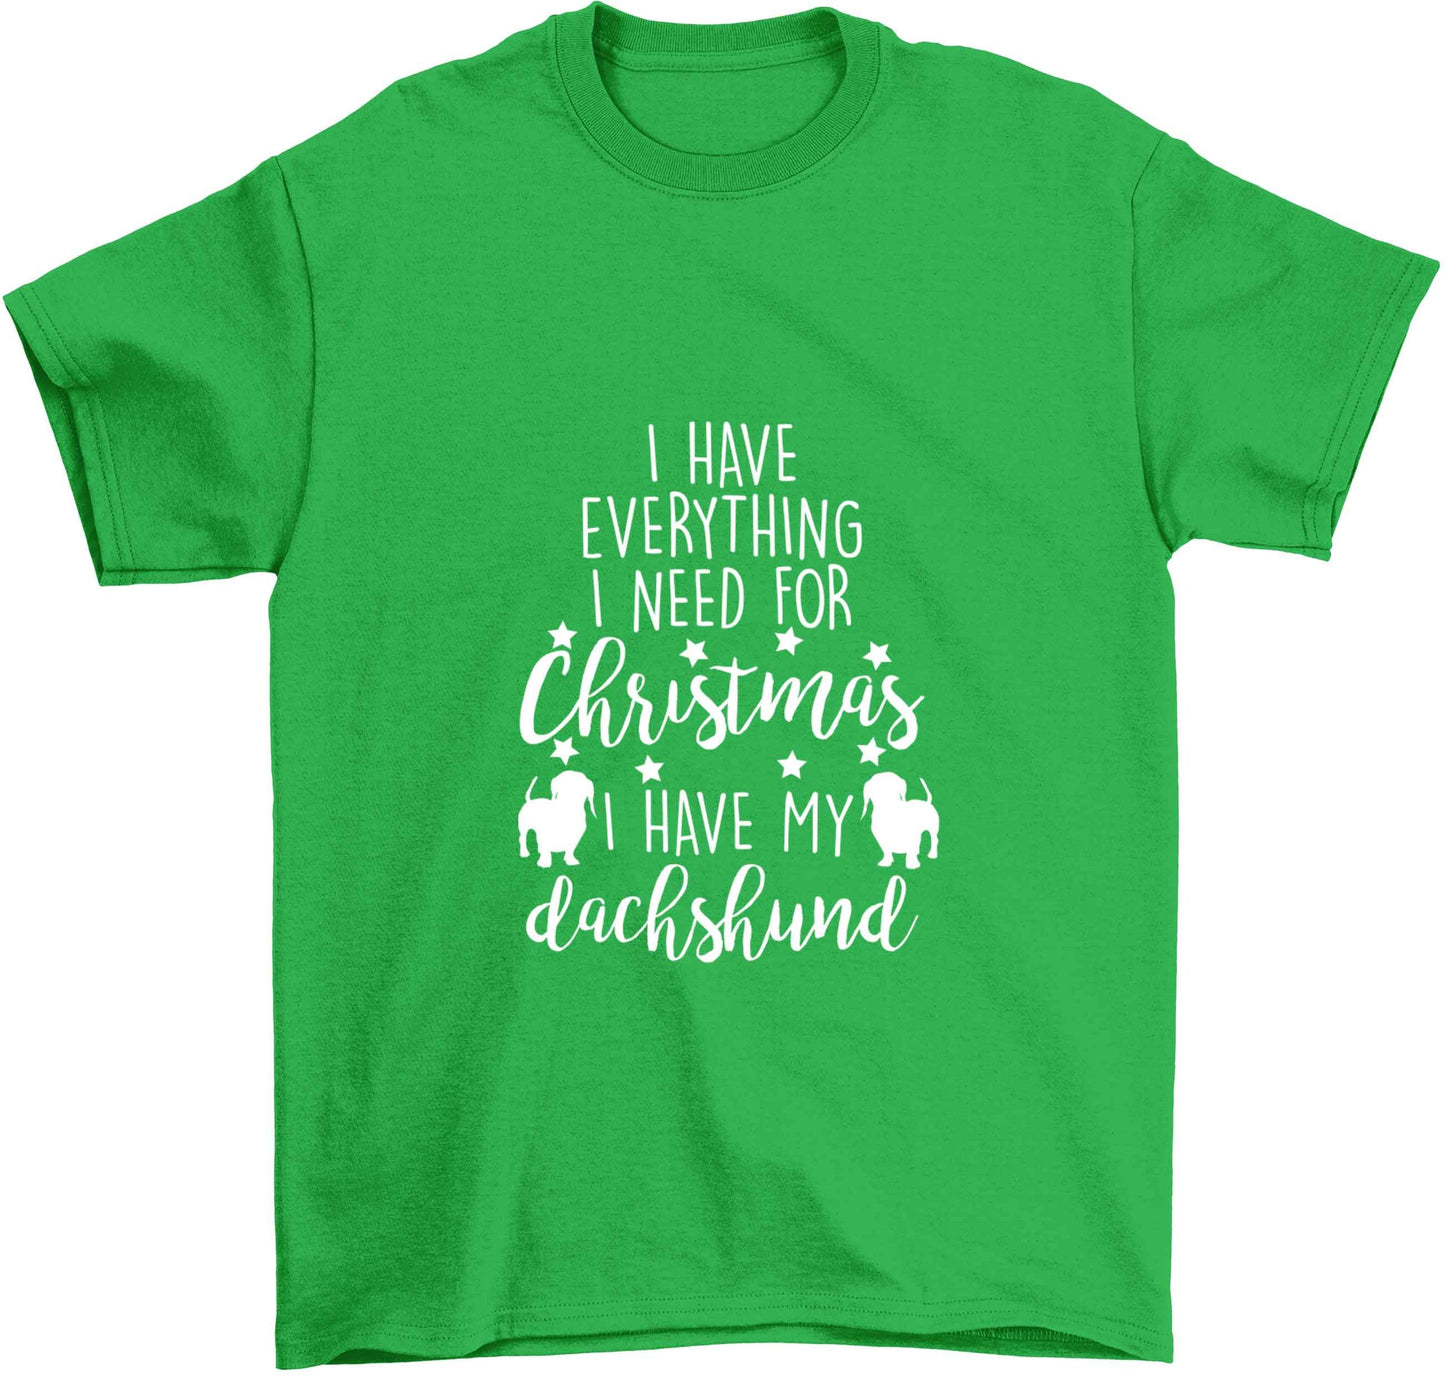 I have everything I need for Christmas I have my dachshund Children's green Tshirt 12-13 Years